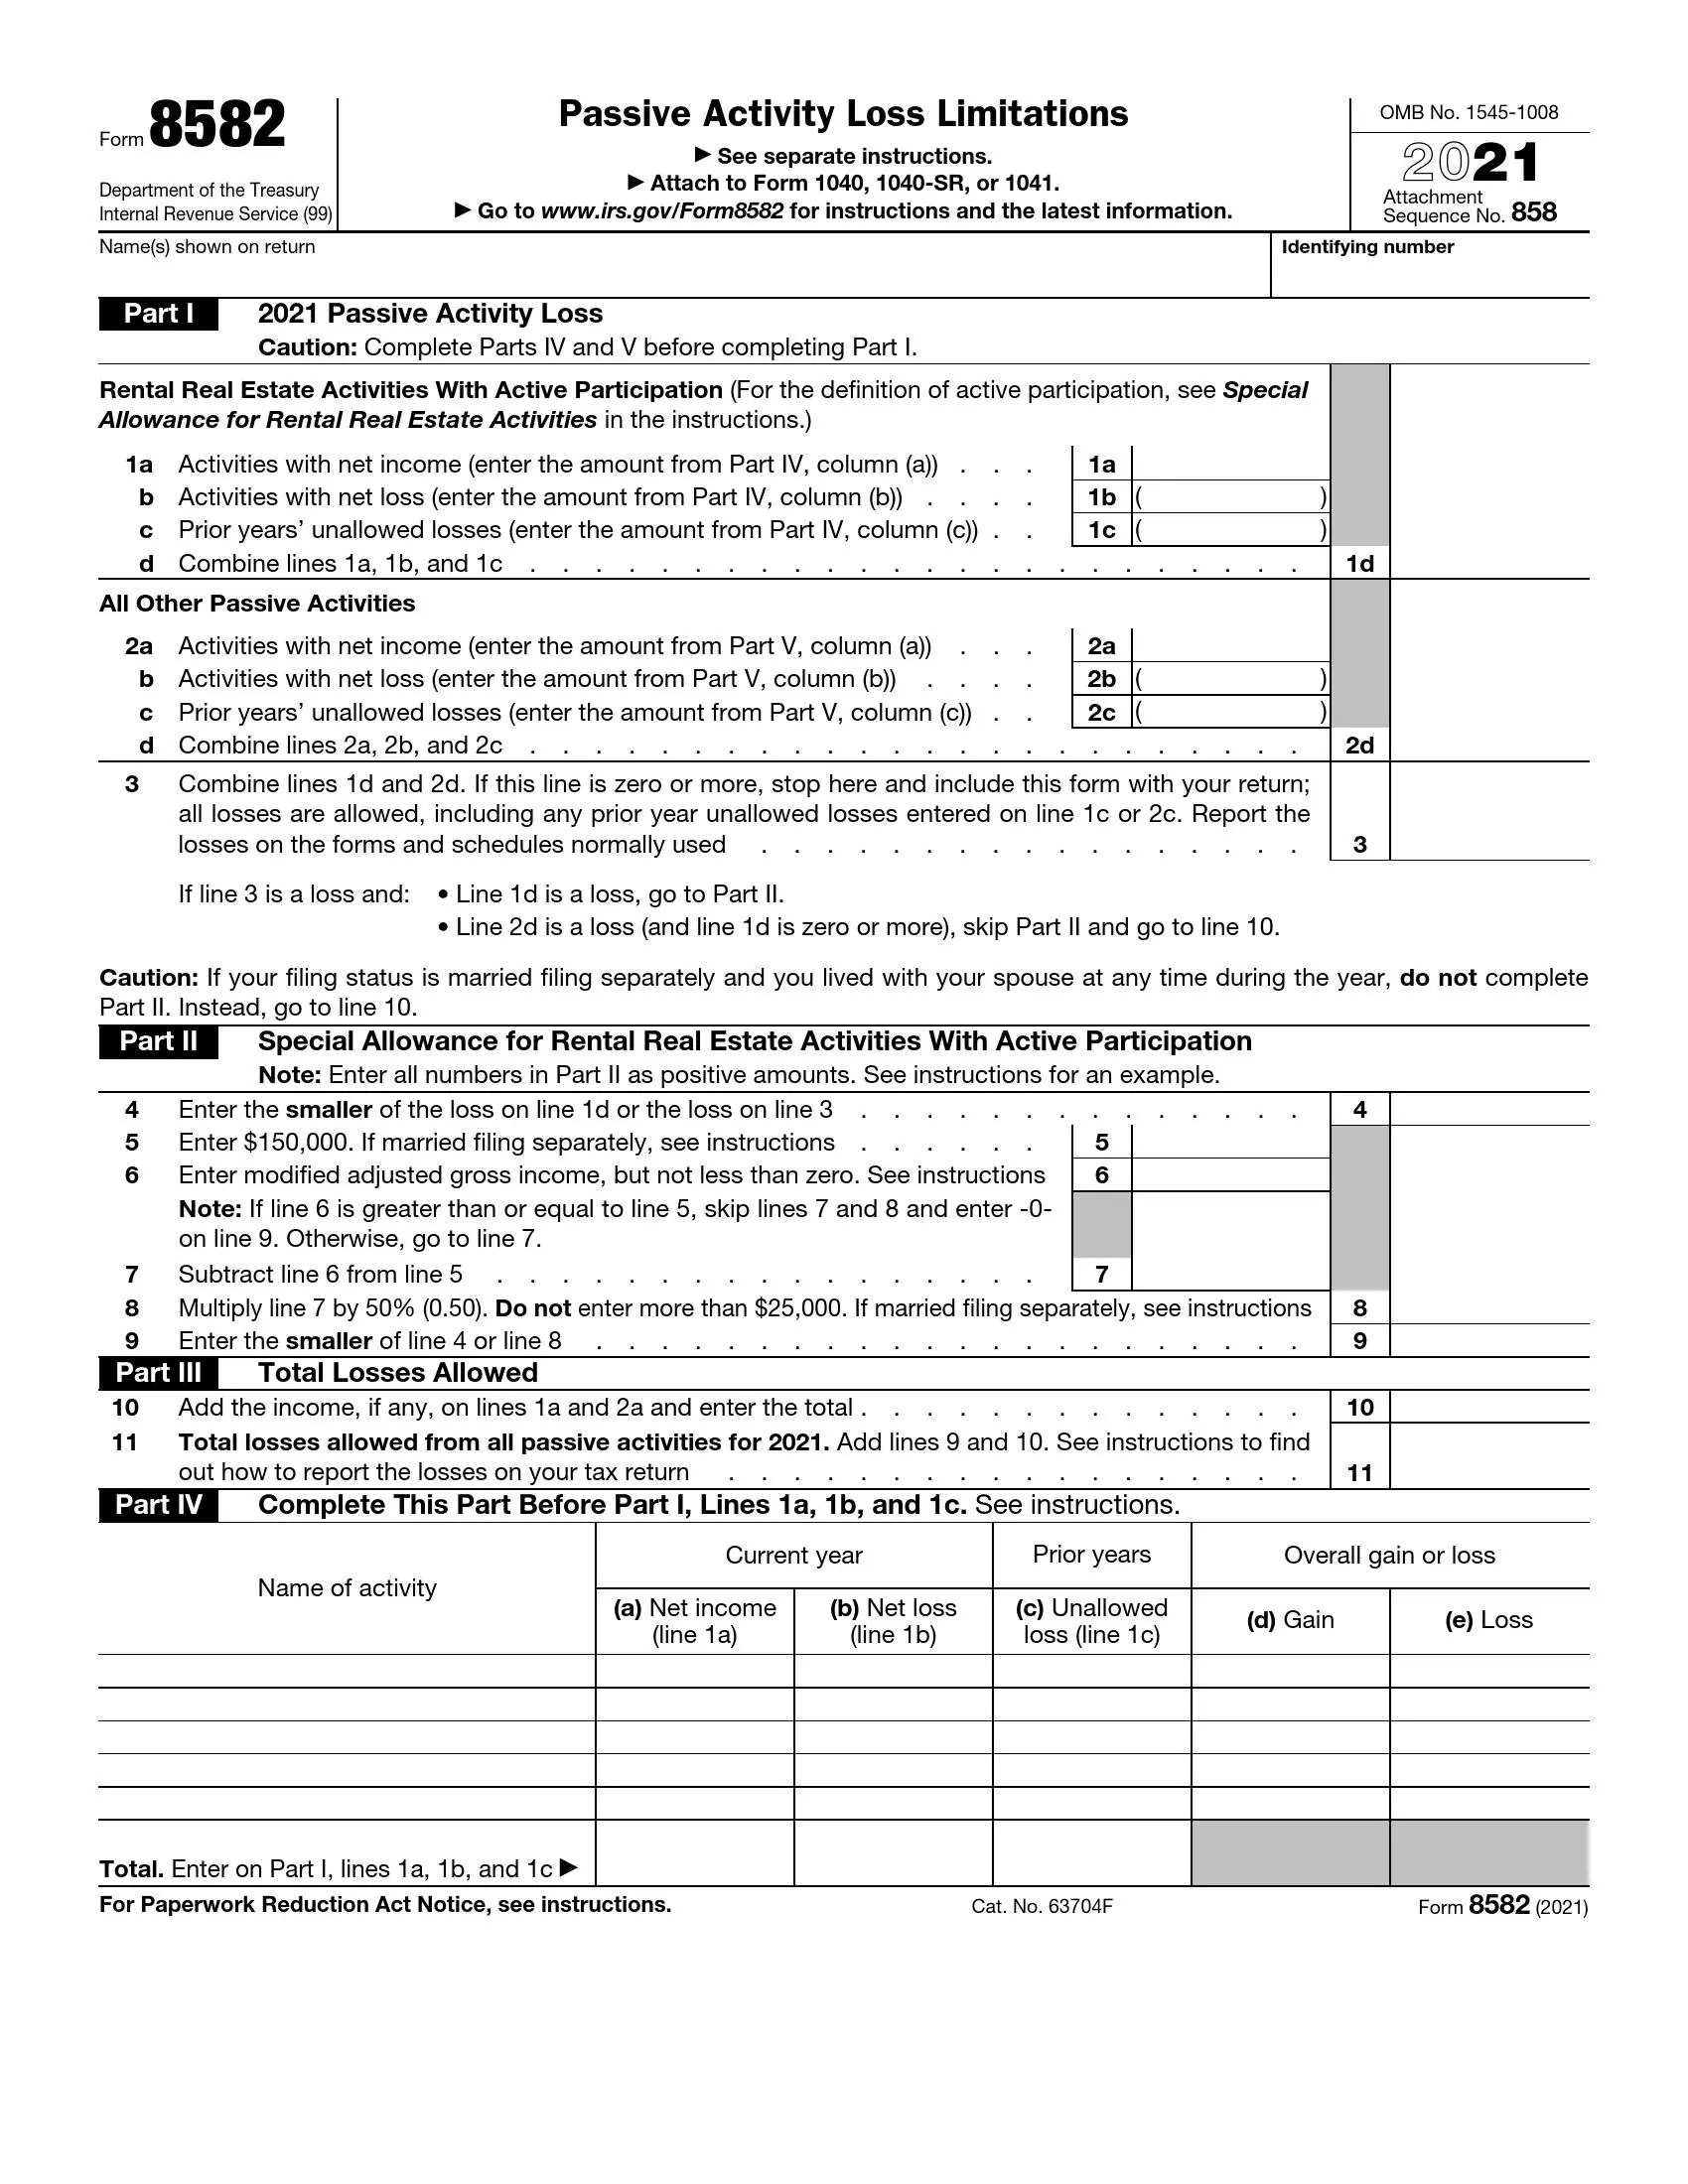 irs form 8582 2021 preview